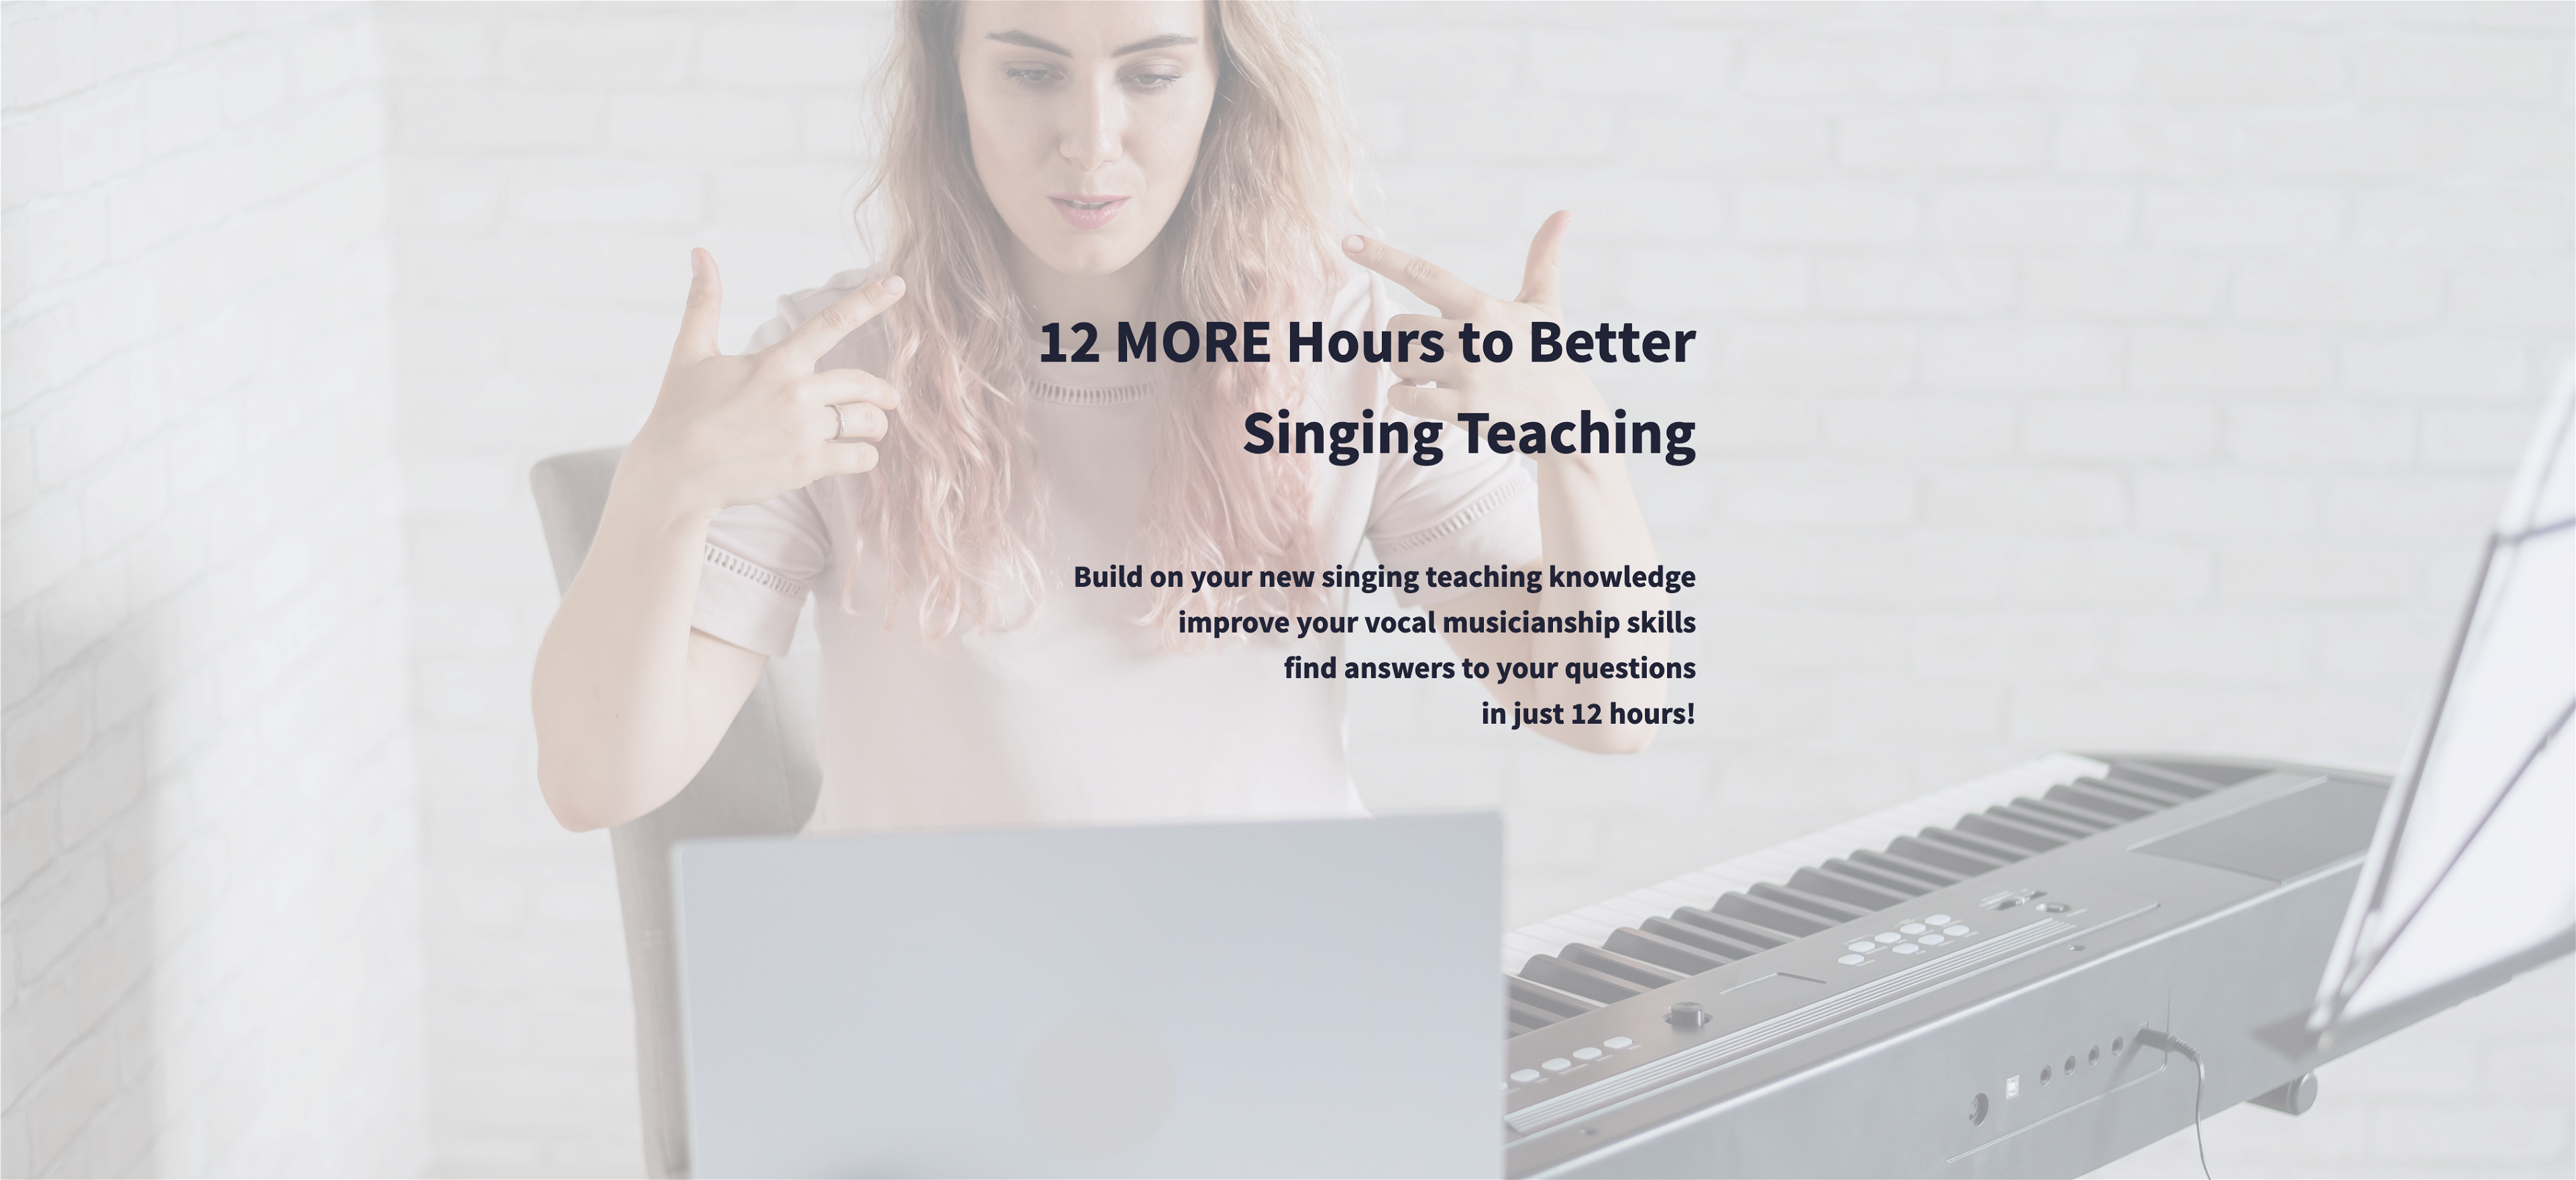 12 MORE Hours to Better Singing Teaching